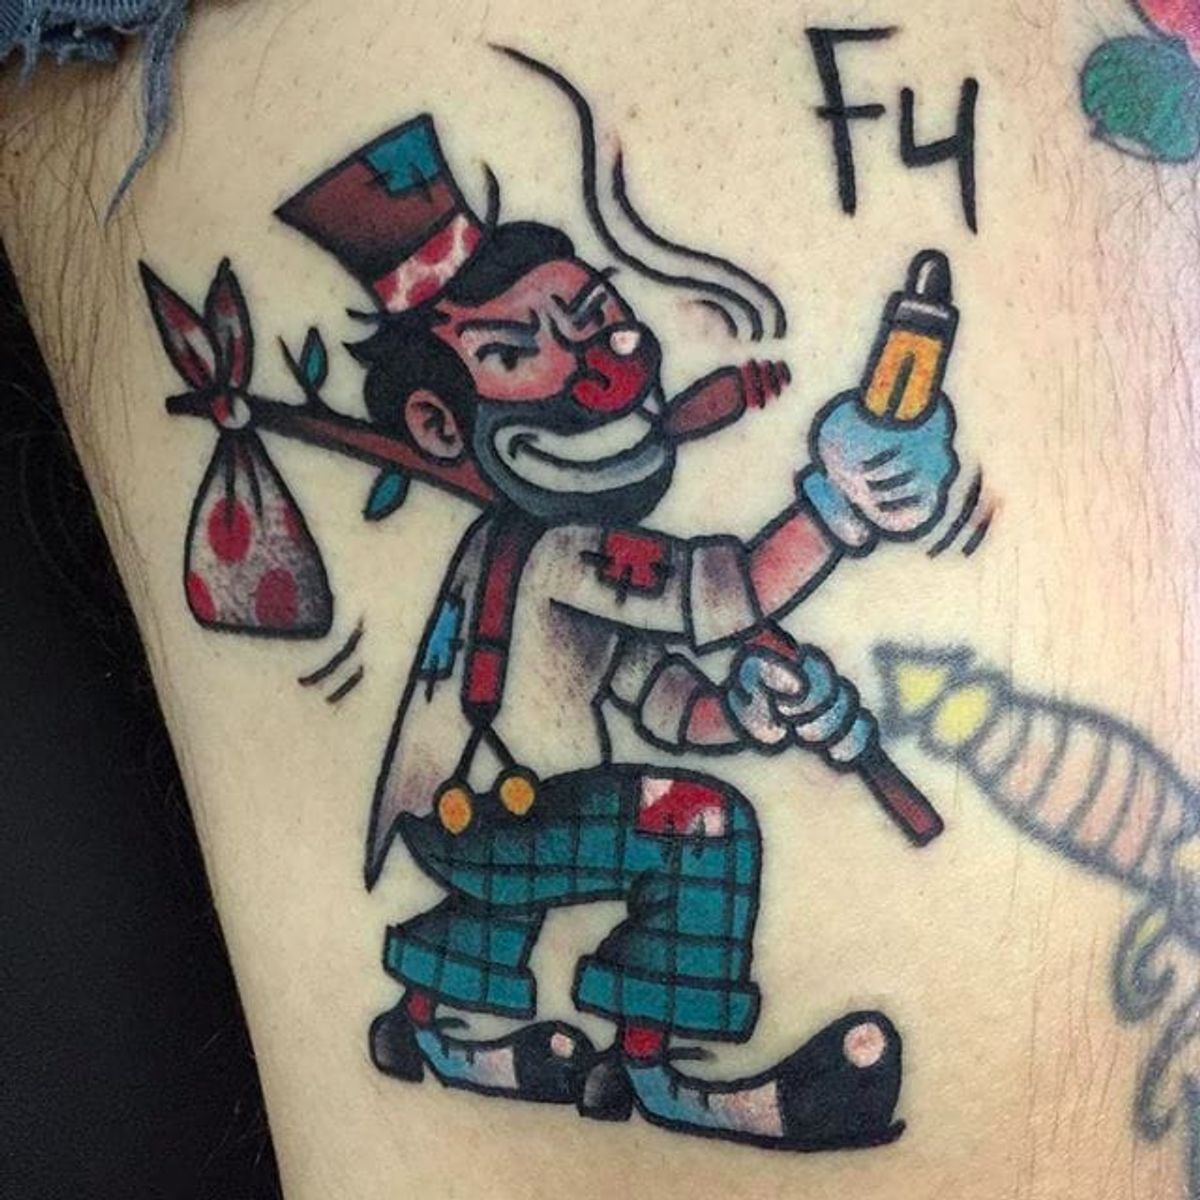 Tattoo uploaded by minerva • Smoking Hobo Clown Tattoo by Pancho # ...